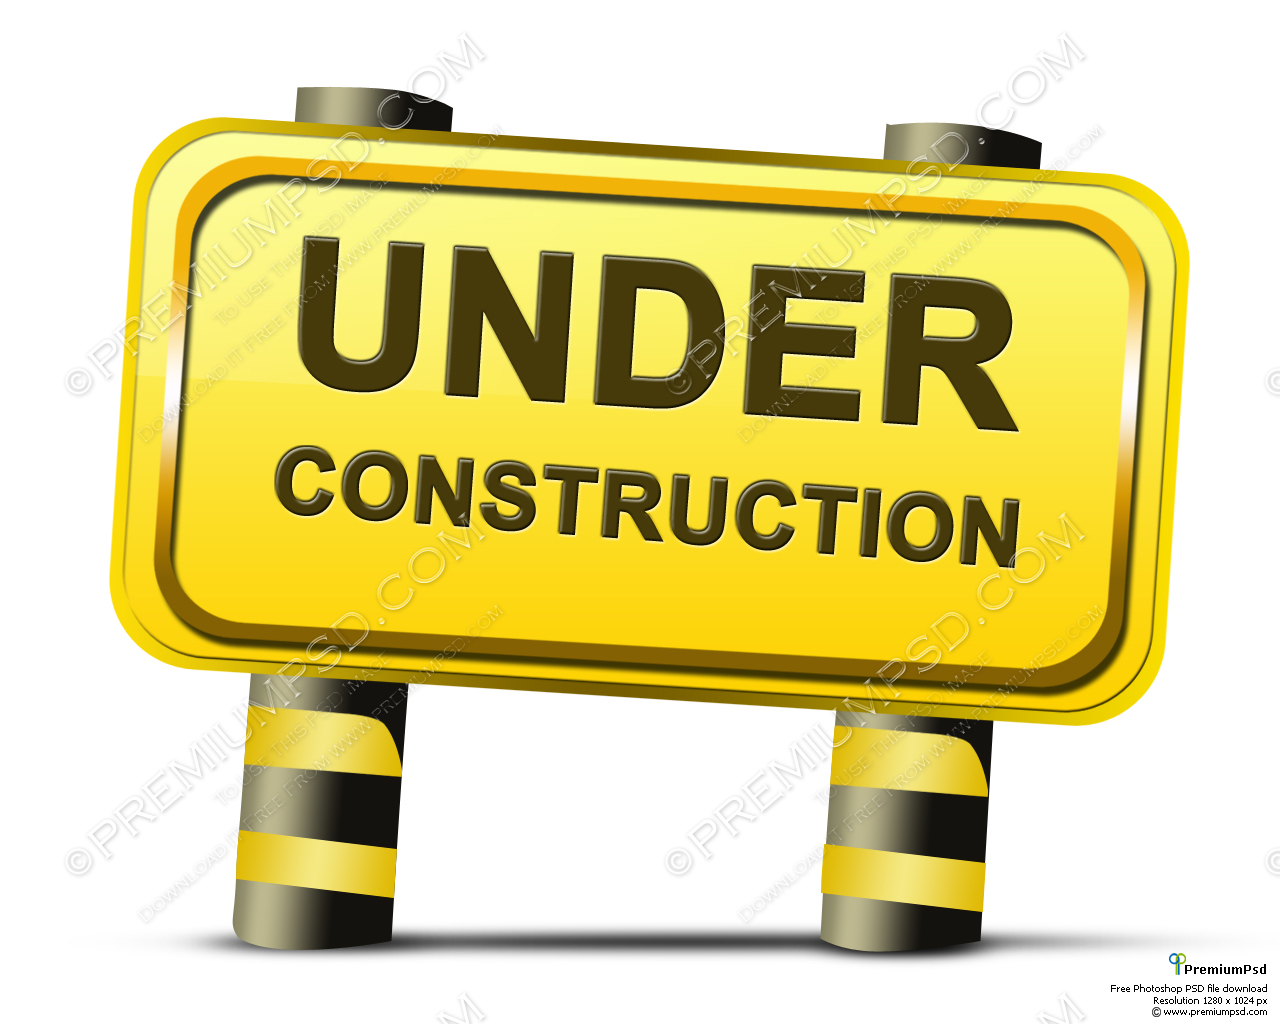 Under Construction Until Further Notice - HD Wallpaper 